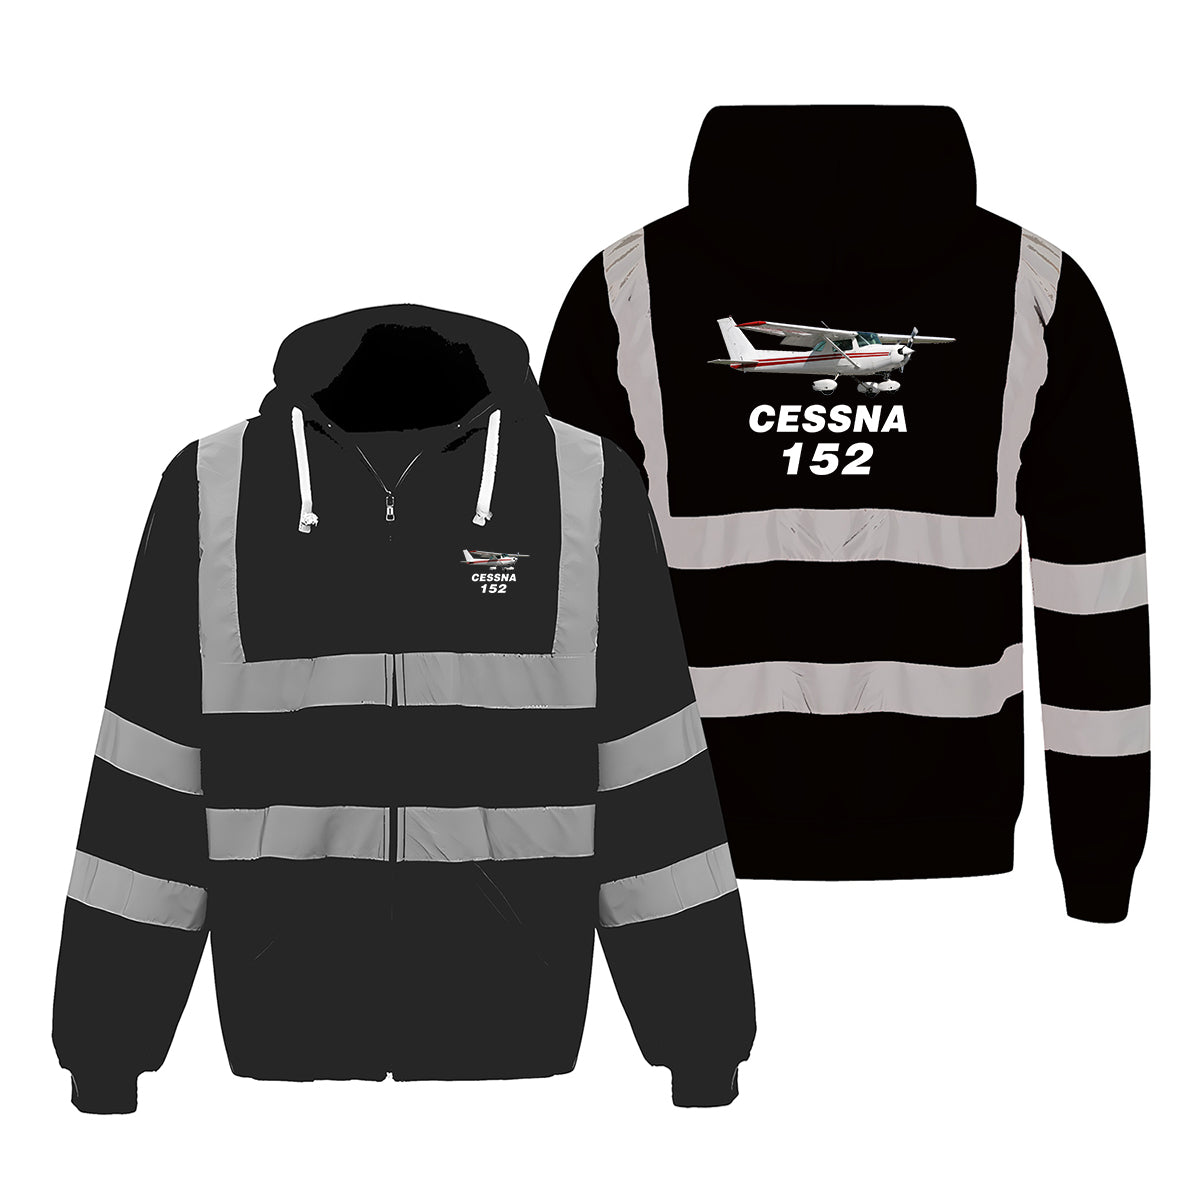 The Cessna 152 Designed Reflective Zipped Hoodies